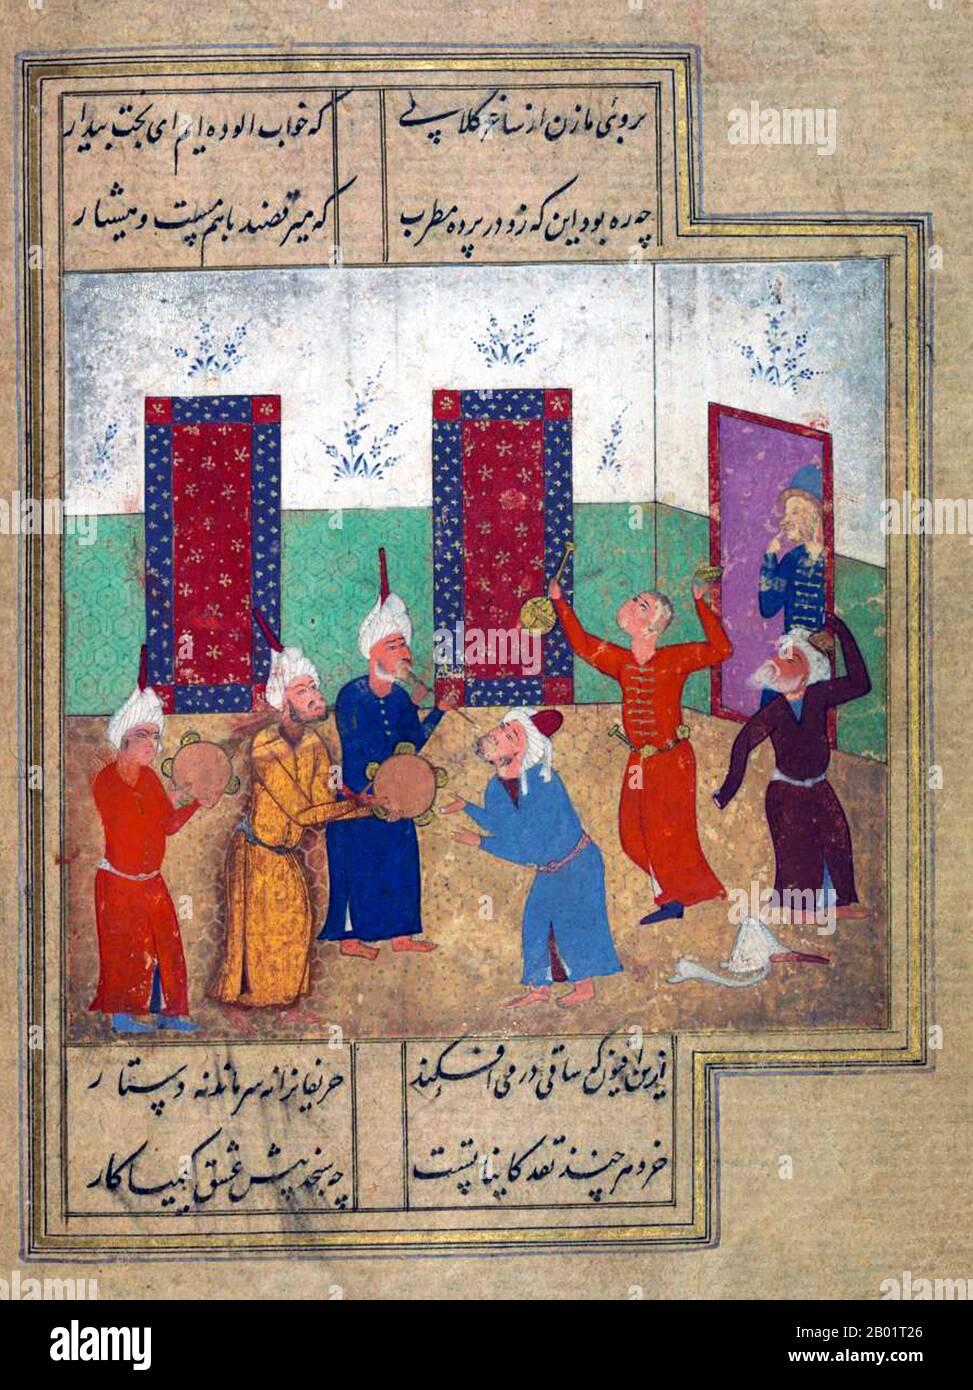 Iran/Persia: A group of sufis dancing. Folio from a divan of Hafez Shirazi (c. 1325-1390), 1552.  Khwāja Shamsu d-Dīn Muhammad Hāfez-e Shīrāzī, known by his pen name Hāfez, was a Persian lyric poet. His collected works composed of series of Persian poetry (Divan) are to be found in the homes of most Persian speakers in Iran and Afghanistan, as well as elsewhere in the world, who learn his poems by heart and use them as proverbs and sayings to this day. His life and poems have been the subject of much analysis, commentary and interpretation. Stock Photo